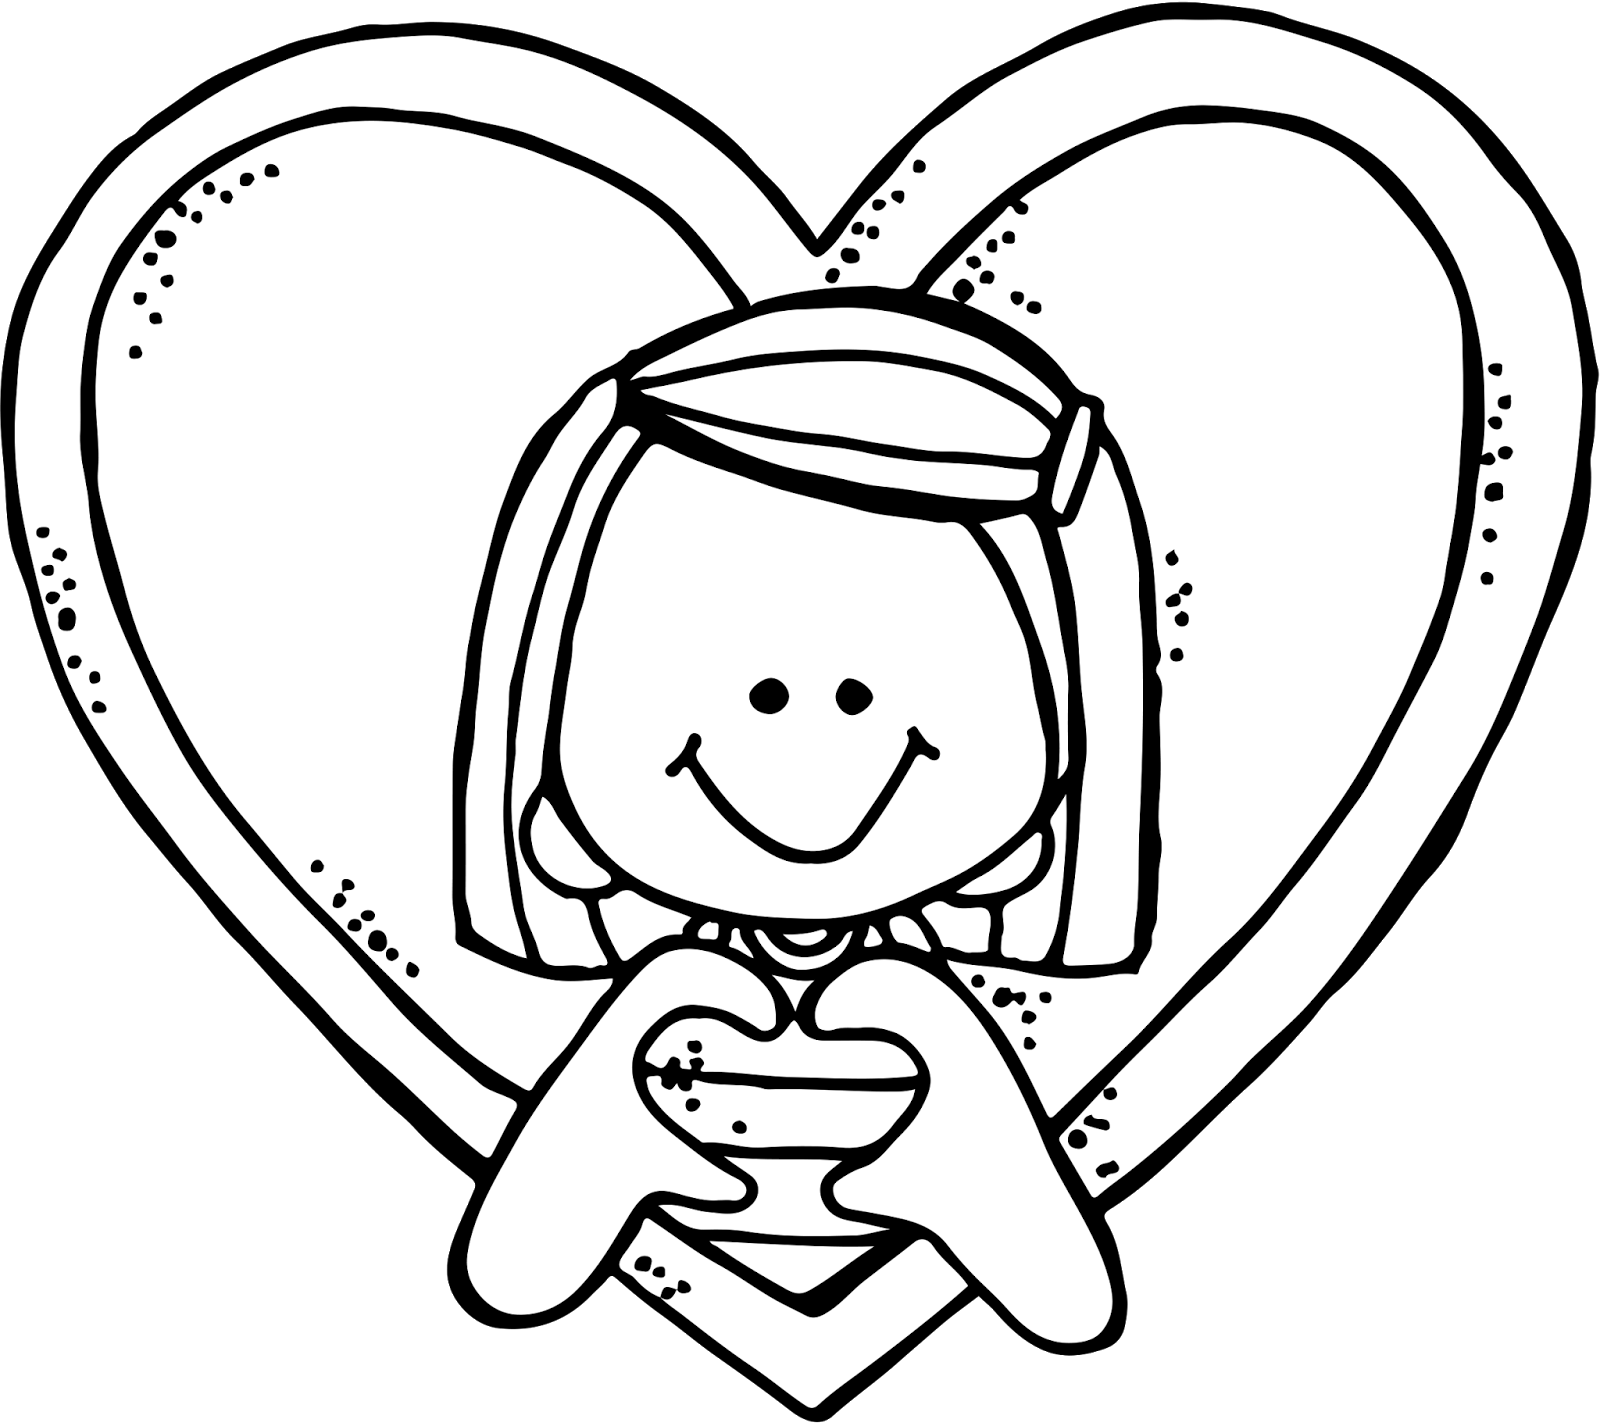 kindness clipart black and white